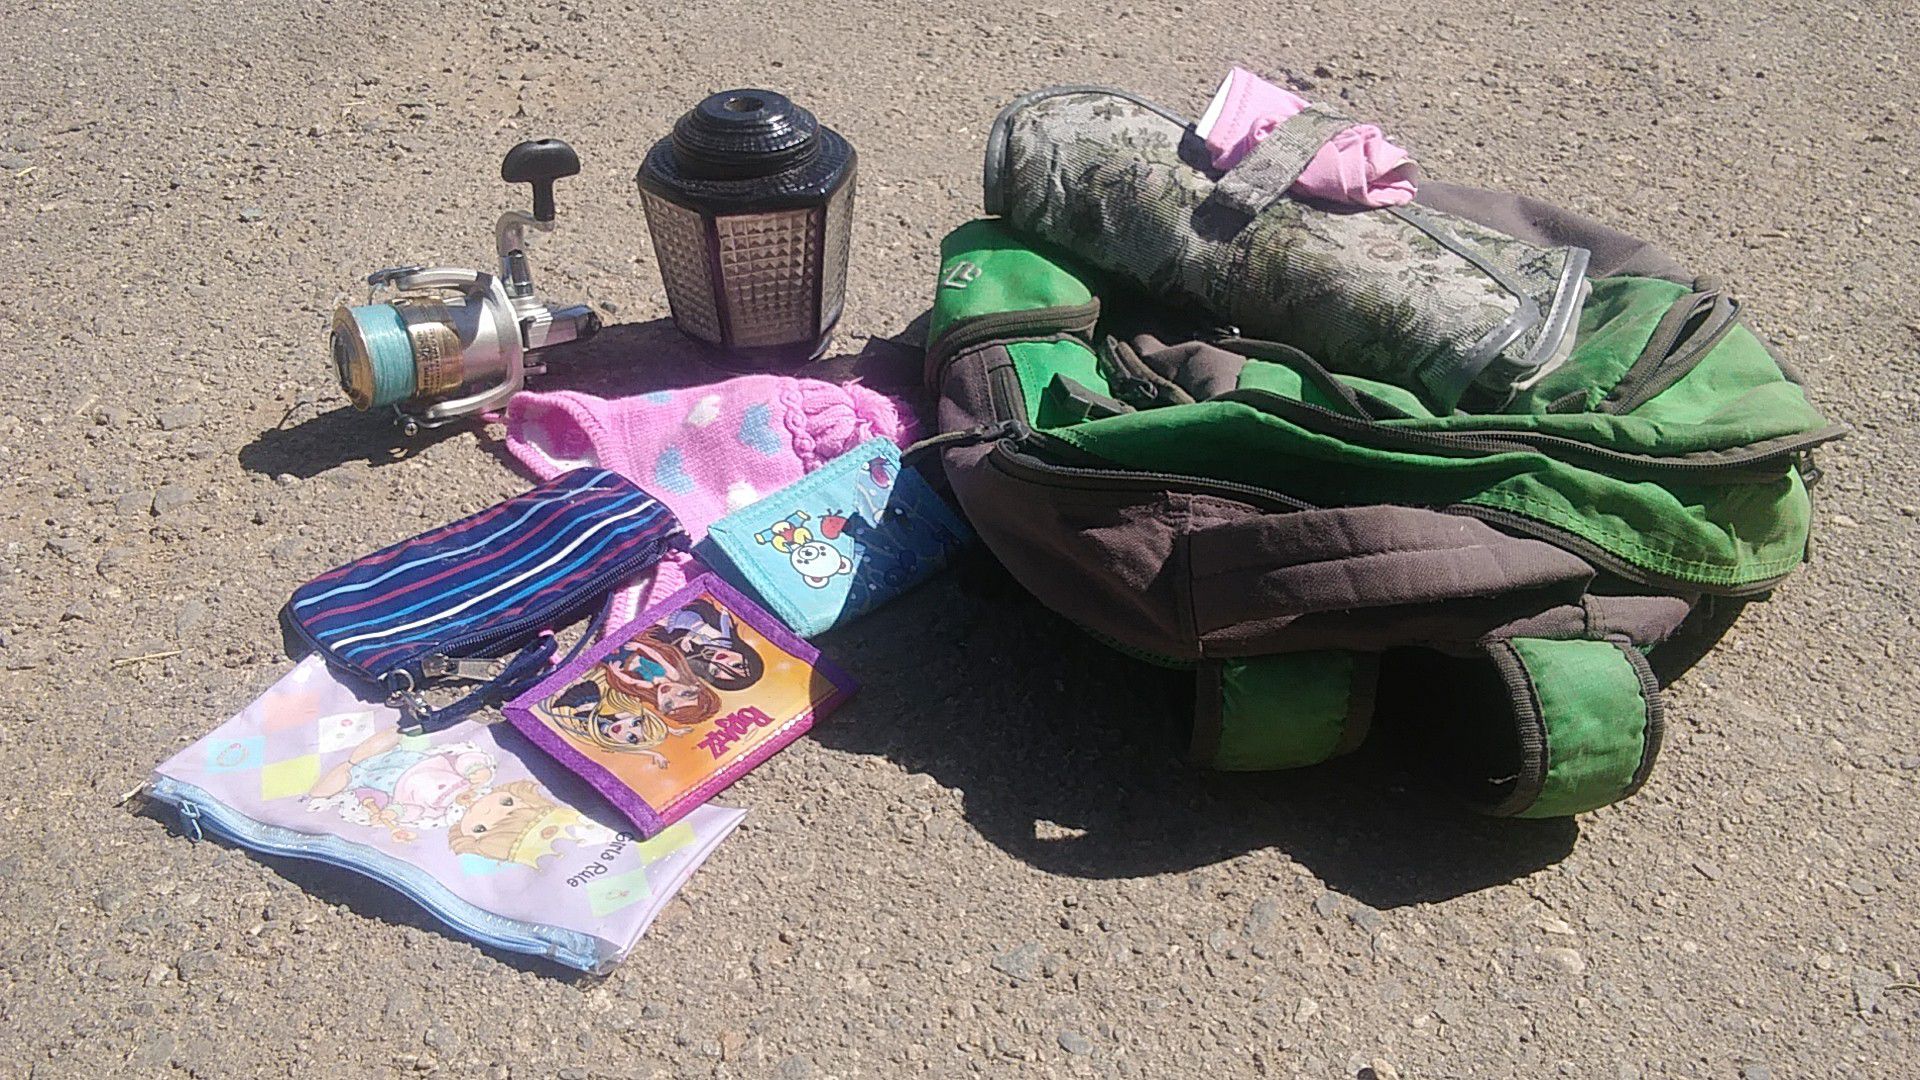 Odds and Ends. Fishing reel, girls purses, backpack, toiletry bag, girls snow cap, porch lantern, Etc.